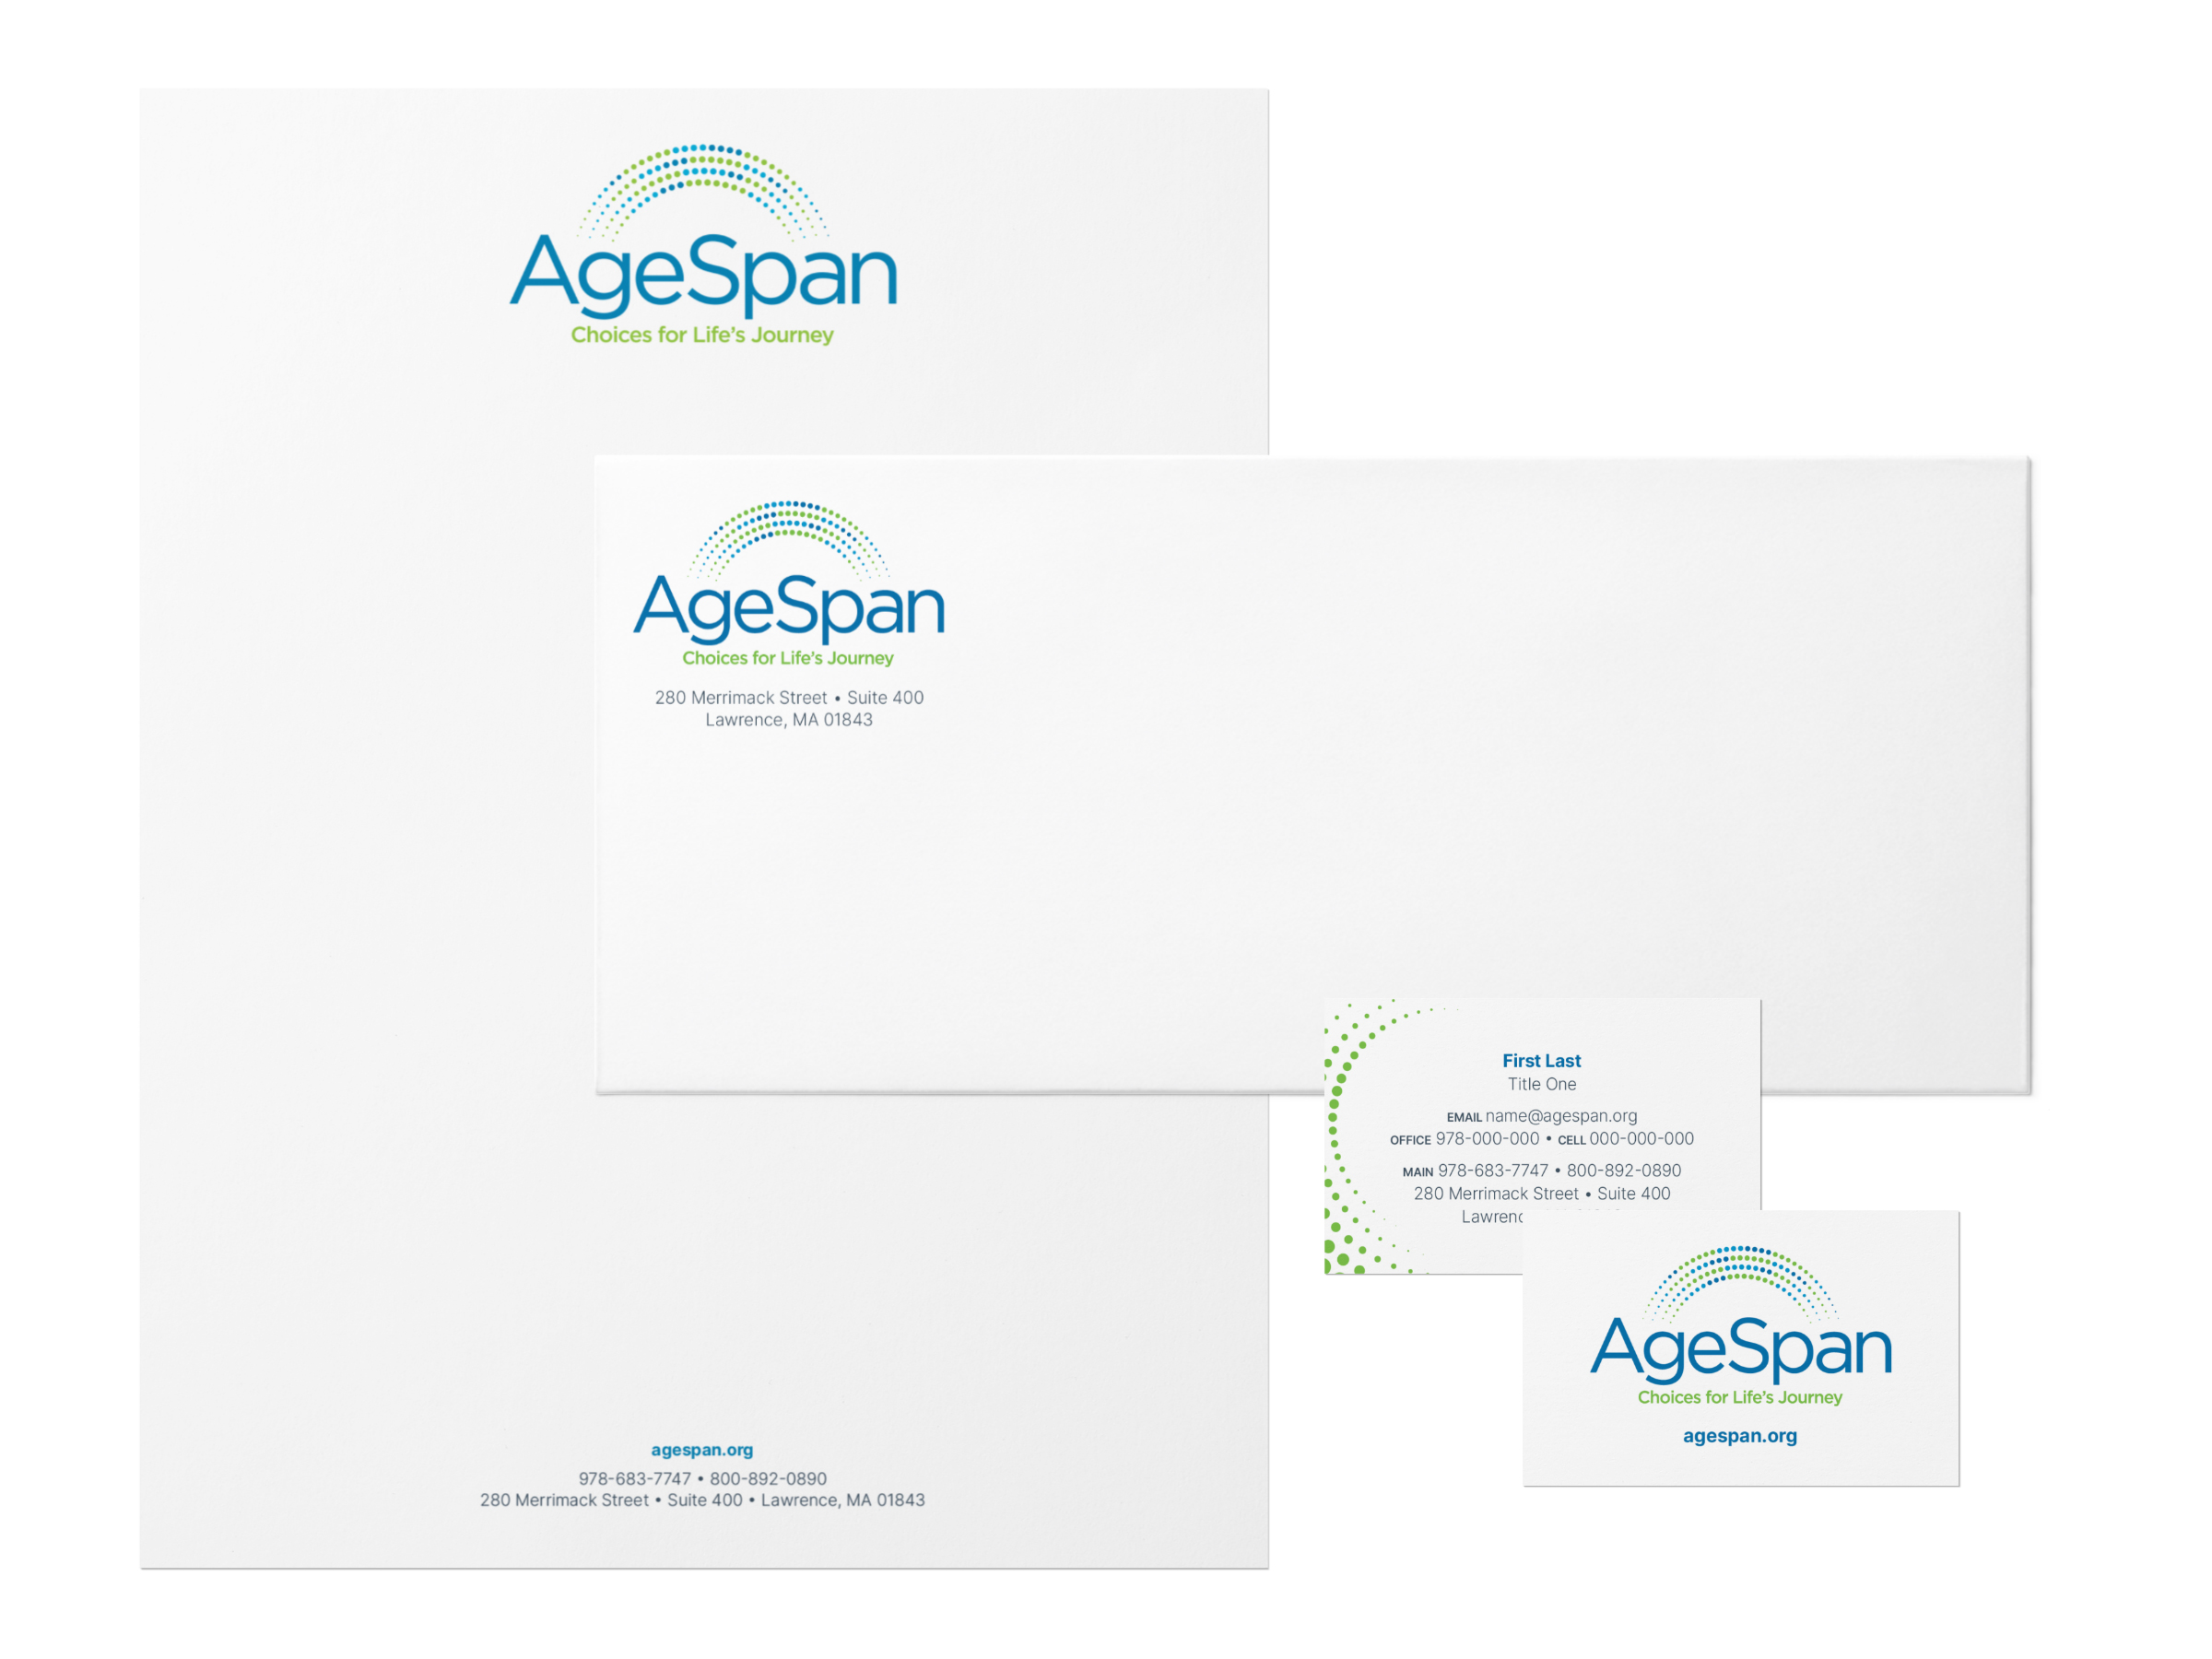 AgeSpan stationery